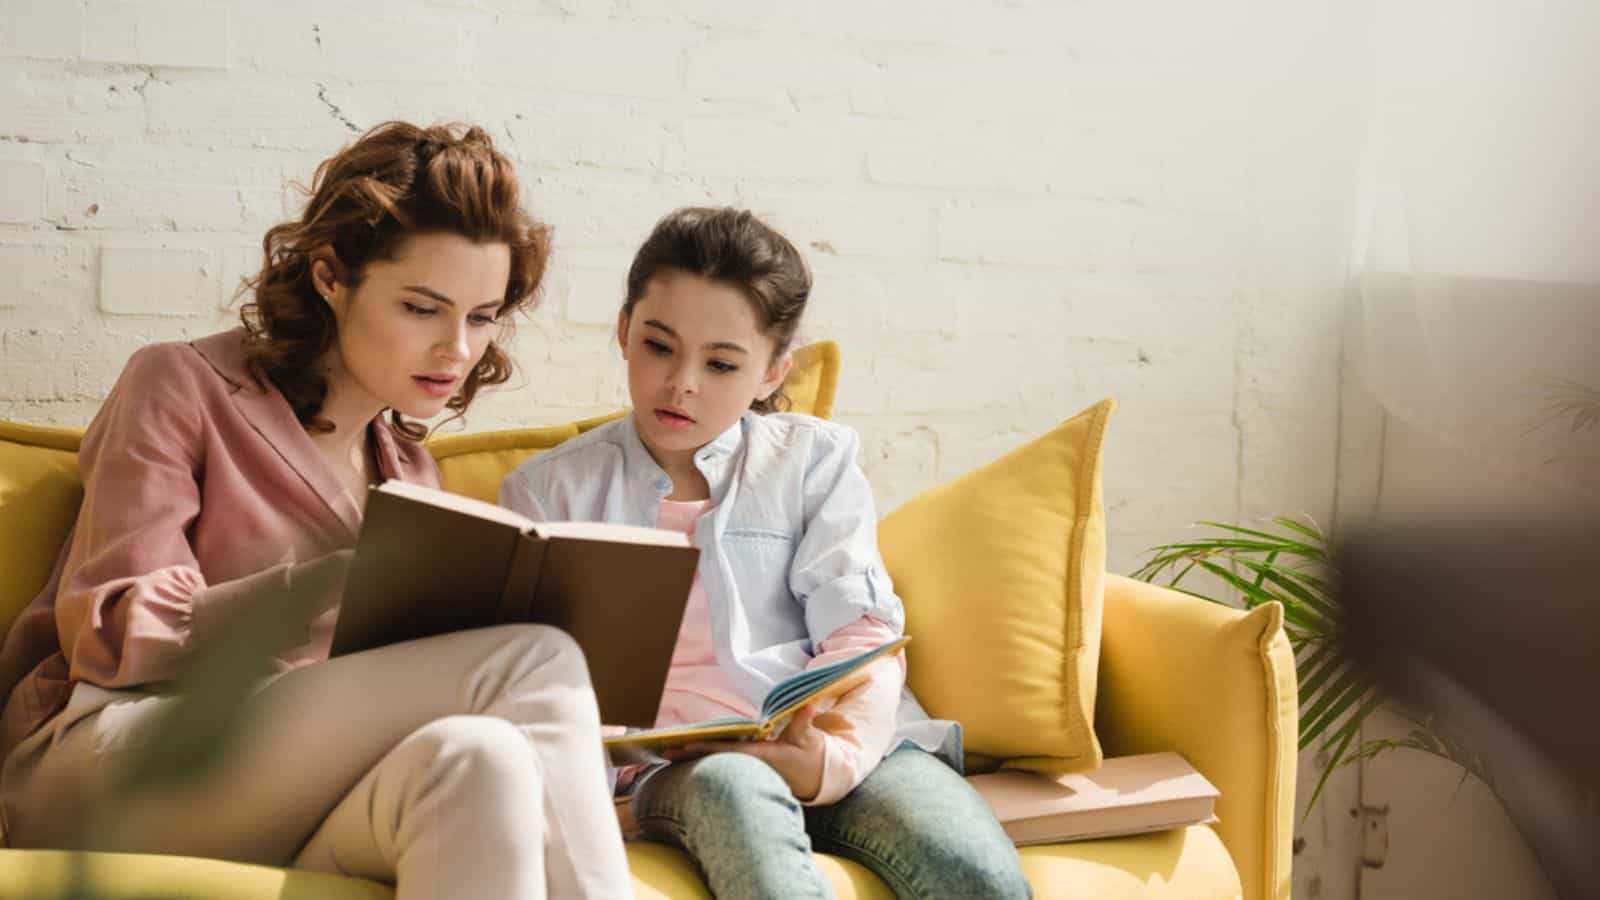 Mother and daughter sitting on yellow sofa at home and reading